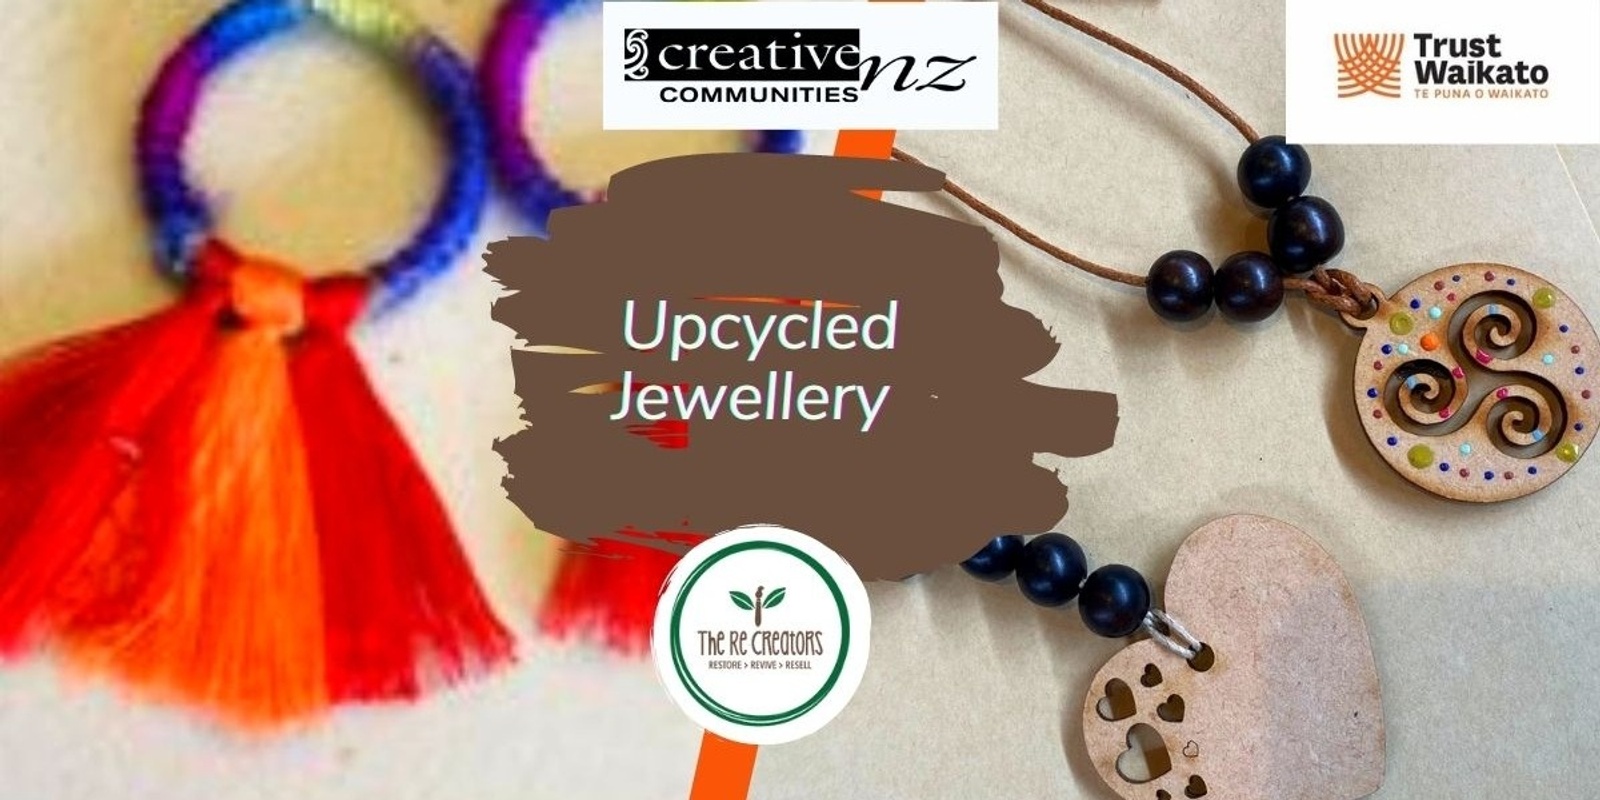 Upcycled Jewellery, Go Eco, Friday, 23 June, 6.00pm- 8.00pm